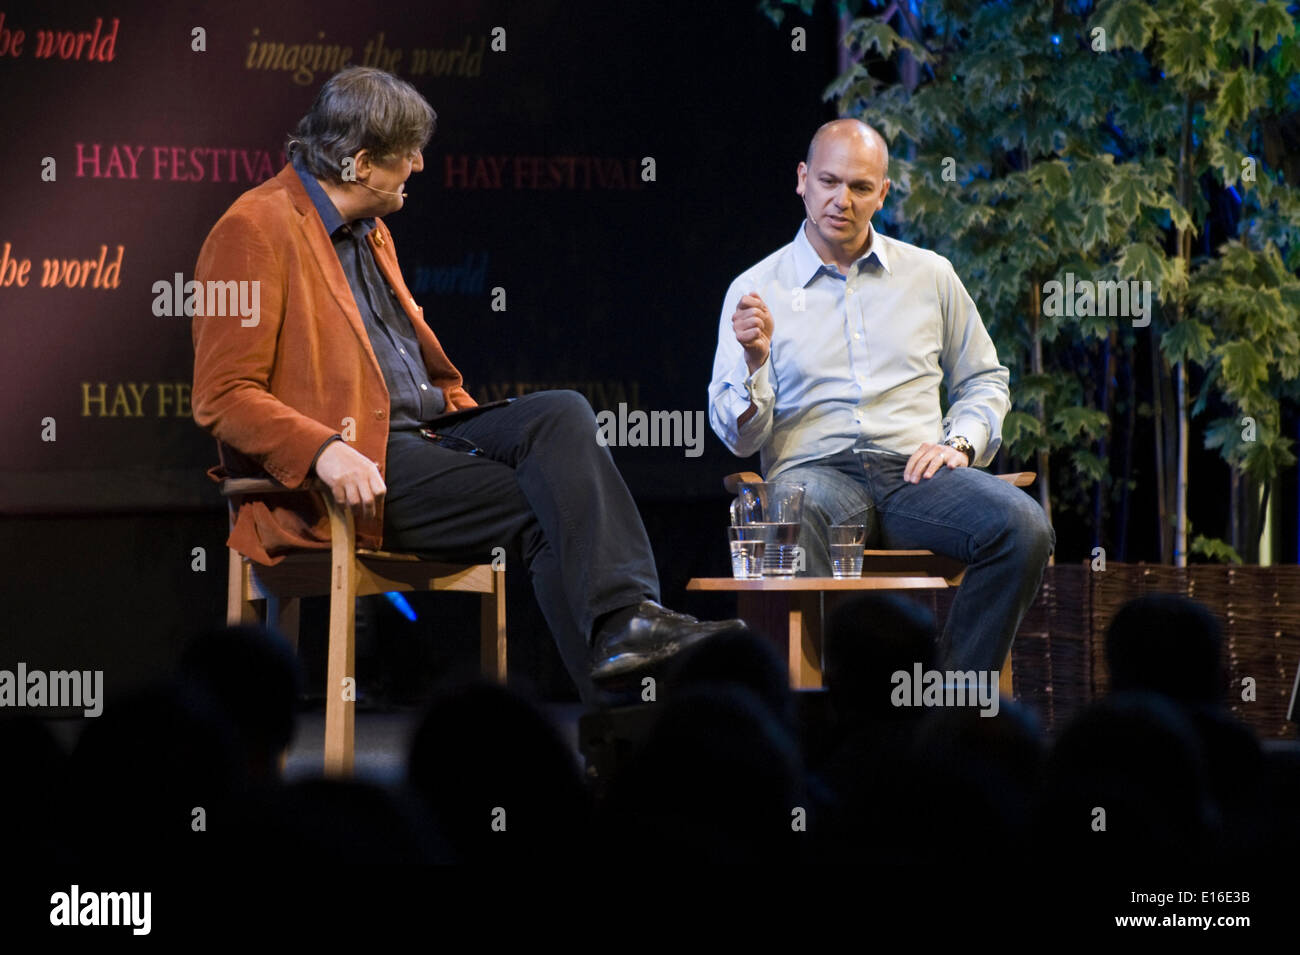 Tony Fadell, creator of the iPod, talking to Stephen Fry on stage at Hay Festival 2014   ©Jeff Morgan Stock Photo